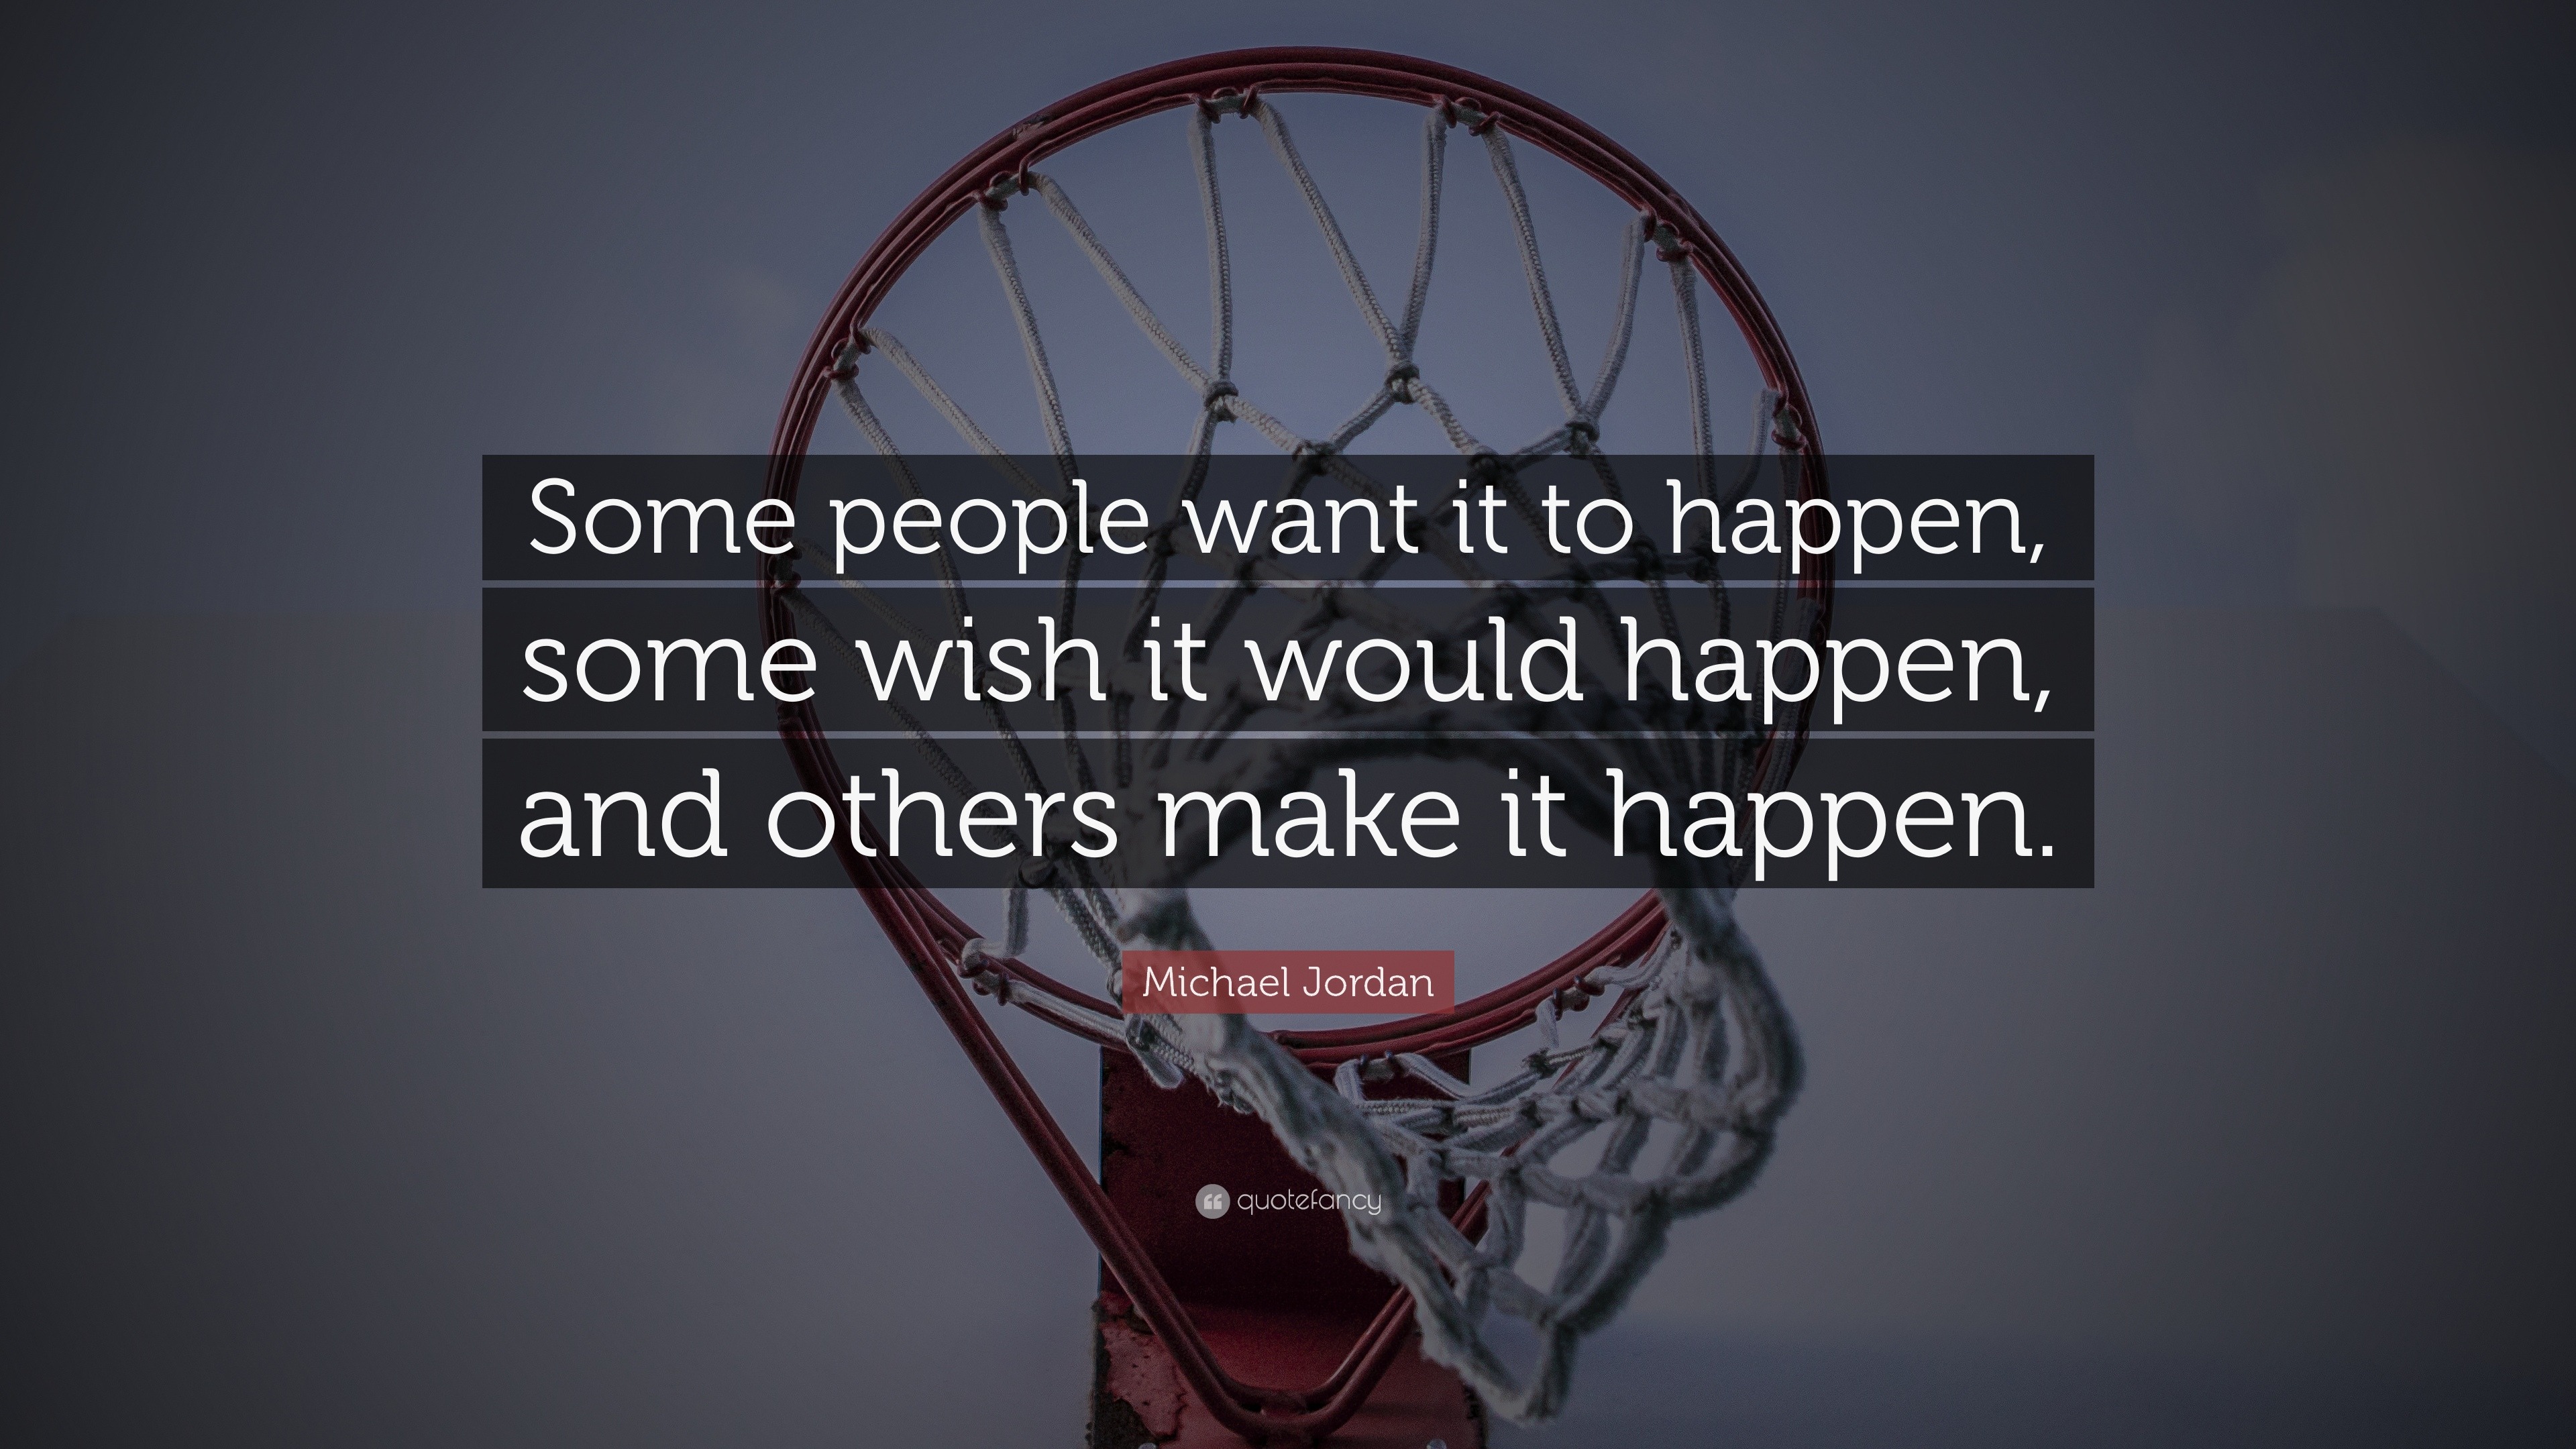 Michael Jordan Quote: “Some people want it to happen, some wish it ...